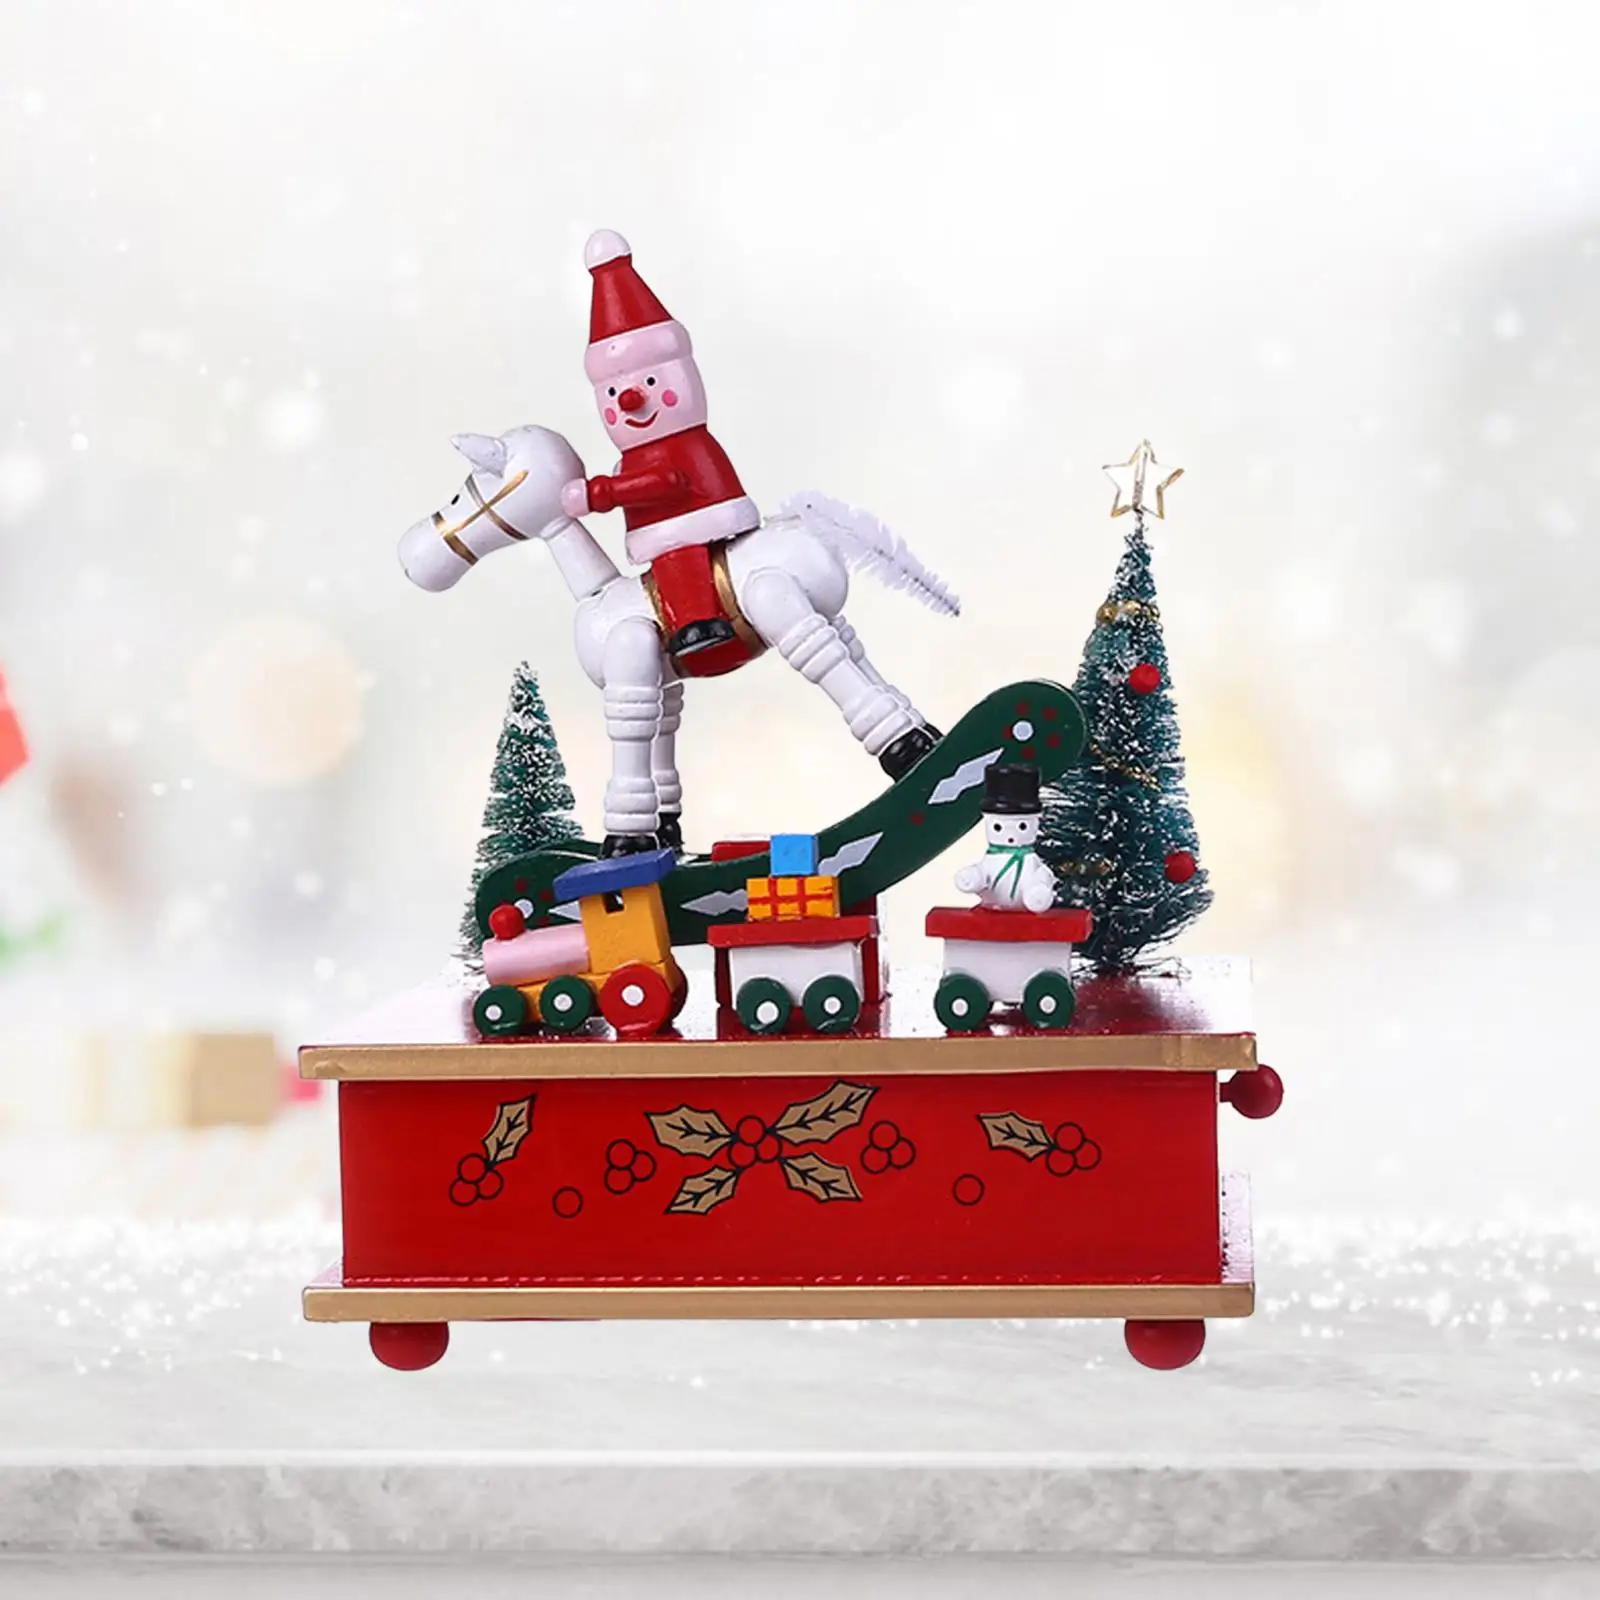 Xmas Music Box Crafts Christmas Statue Home Decoration Accessories Table Centerpiece for Party Holiday Shelf Living Room Office